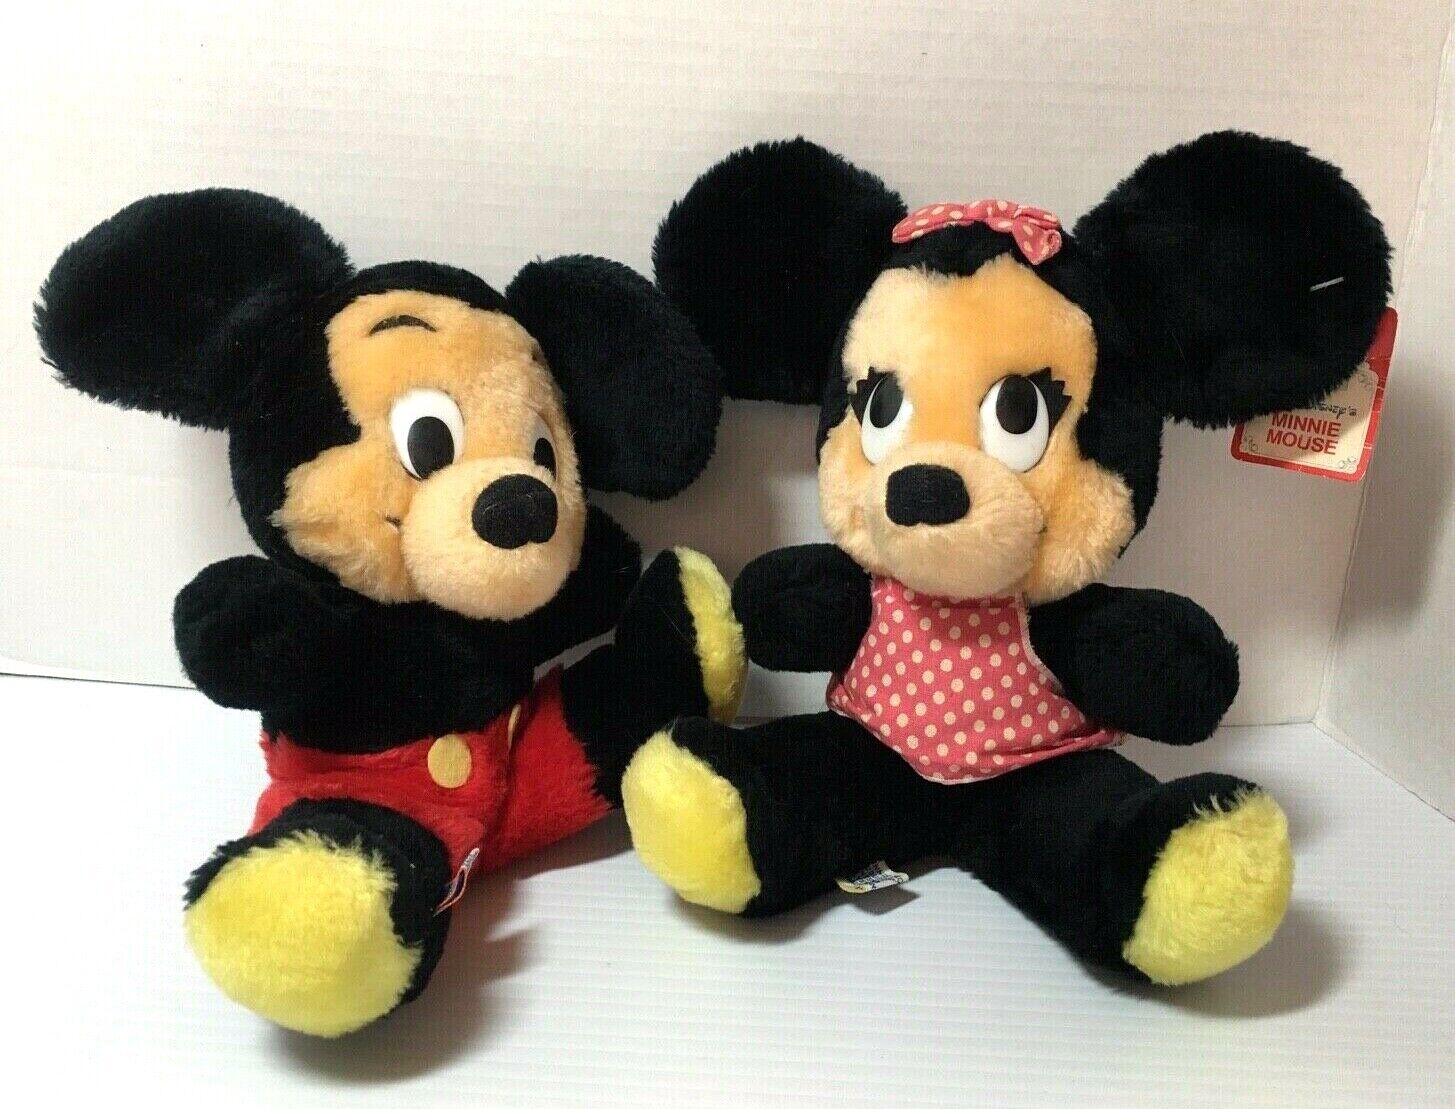 Vintage Mickey & Minnie Mouse Plush Shredded Clippings Walt Disney Productions 